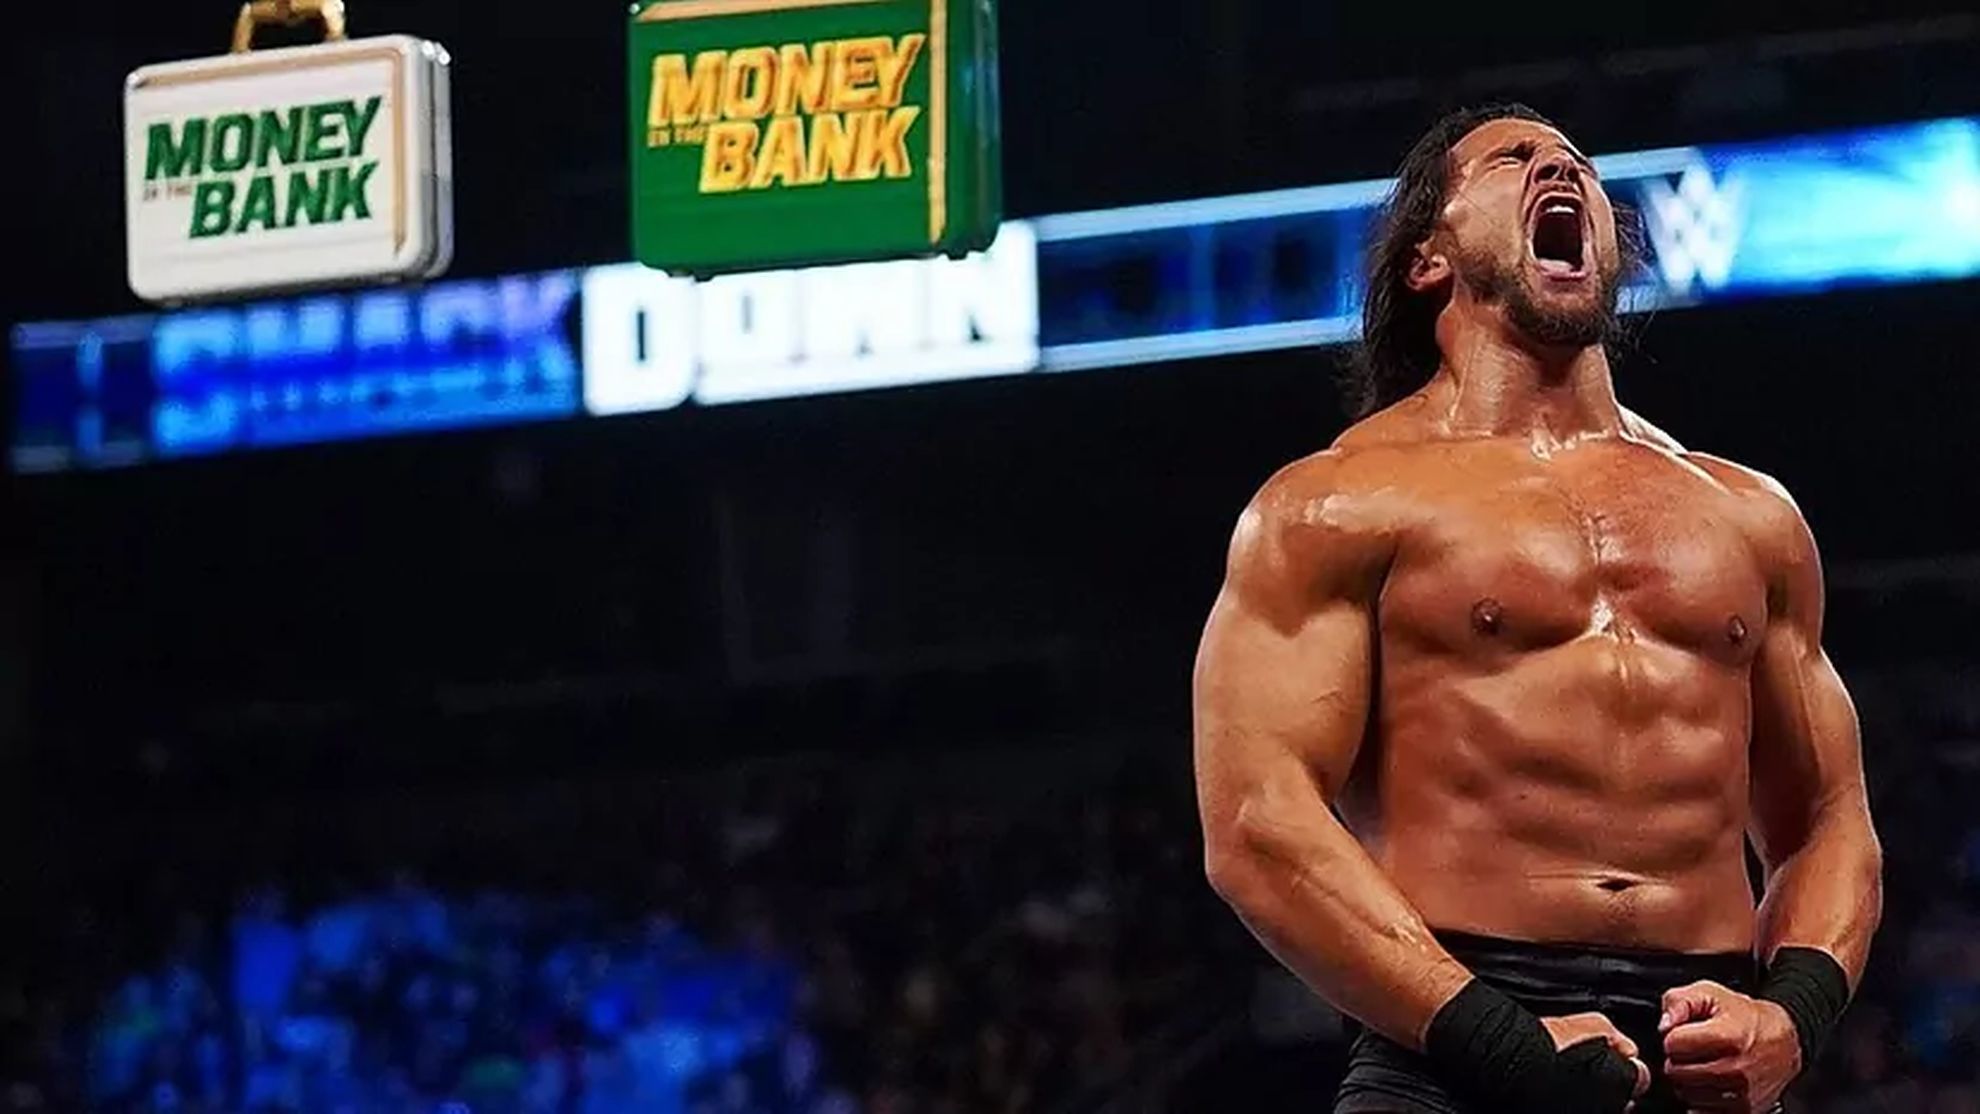 Madcap Moss takes Four Fatal Way to qualify for Money in the Bank ladder match